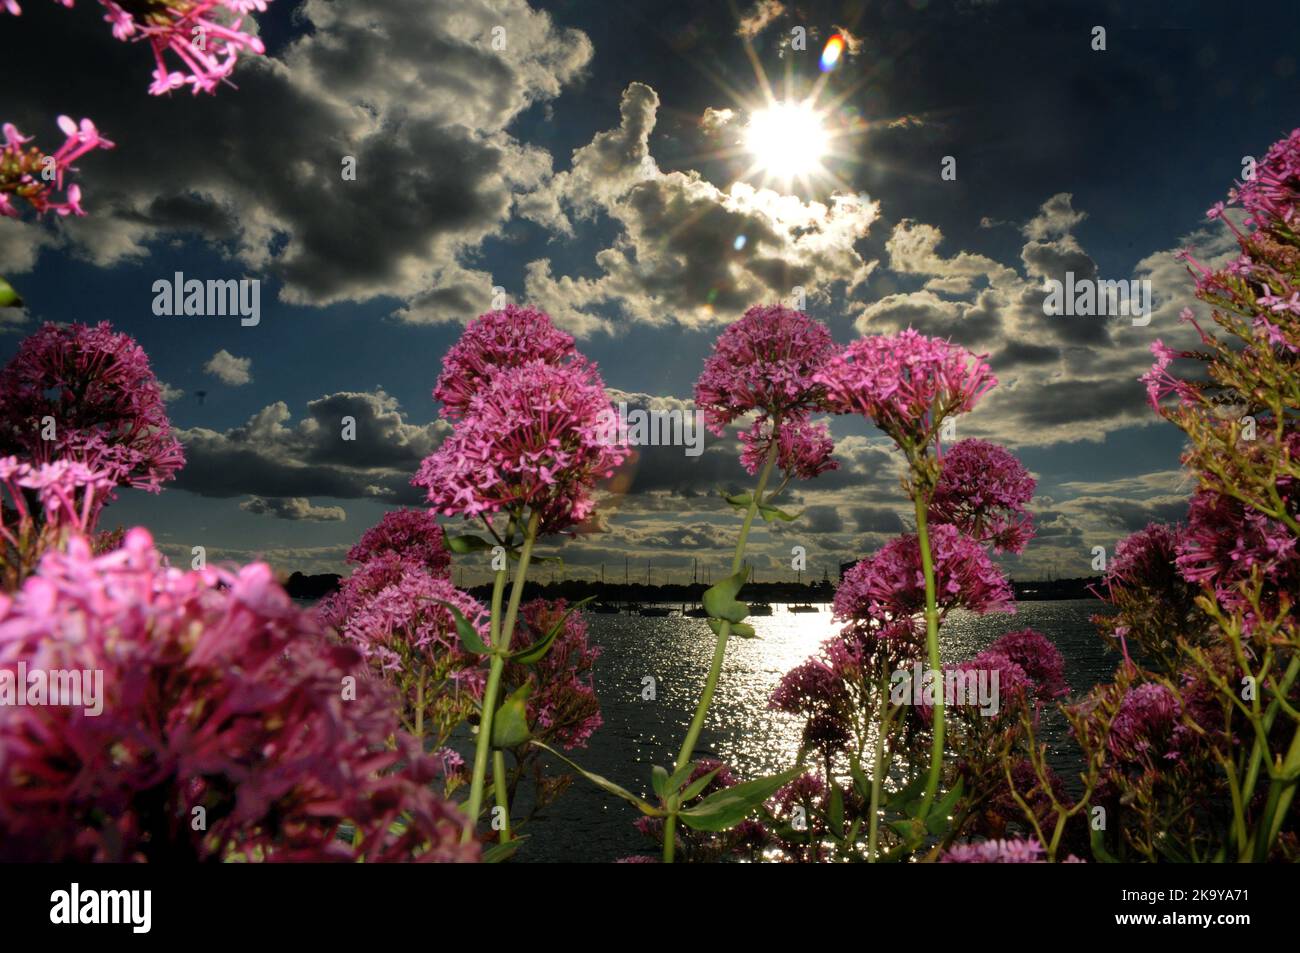 23.05.2015  Purple Valerianflowers  sprout from a wall at Port Solent, near Portsmouth standing out amongst the clouds and  bright sunshine a nd long June days  Pic Mike Walker, Mike Walker Pictures Stock Photo